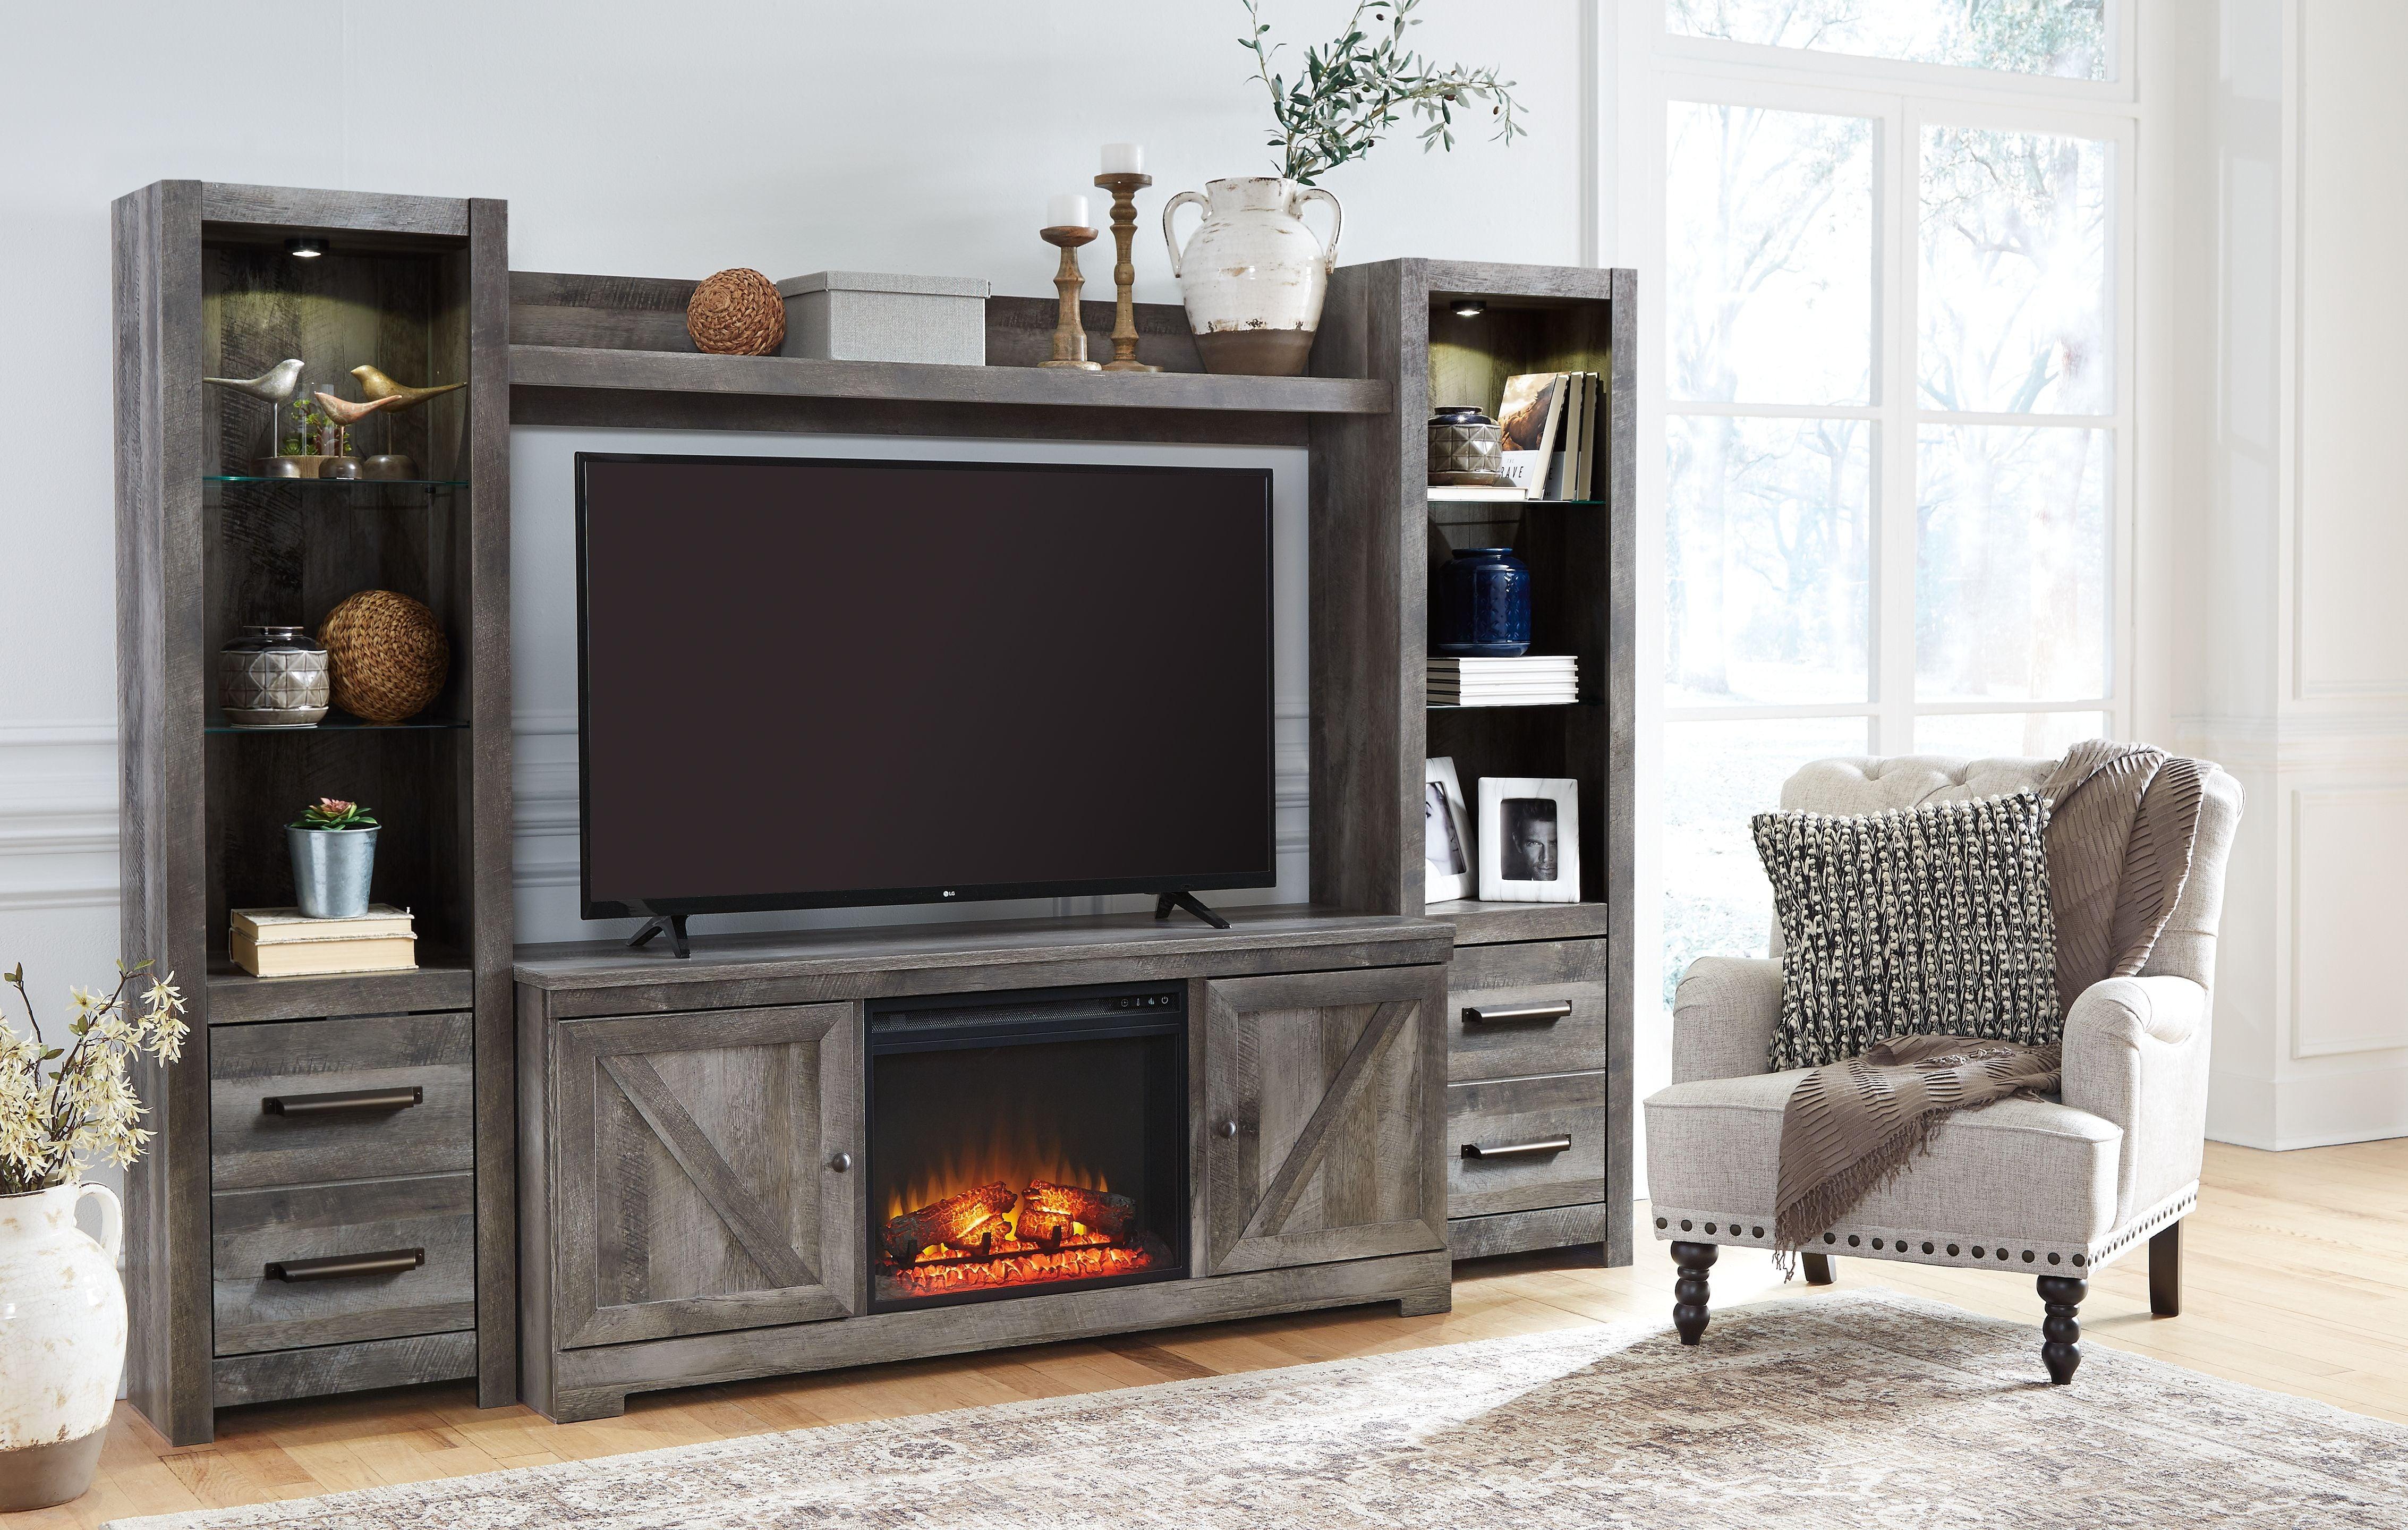 Signature Design by Ashley® - Wynnlow - Gray - Entertainment Center - TV Stand With Glass/Stone Fireplace Insert - 5th Avenue Furniture